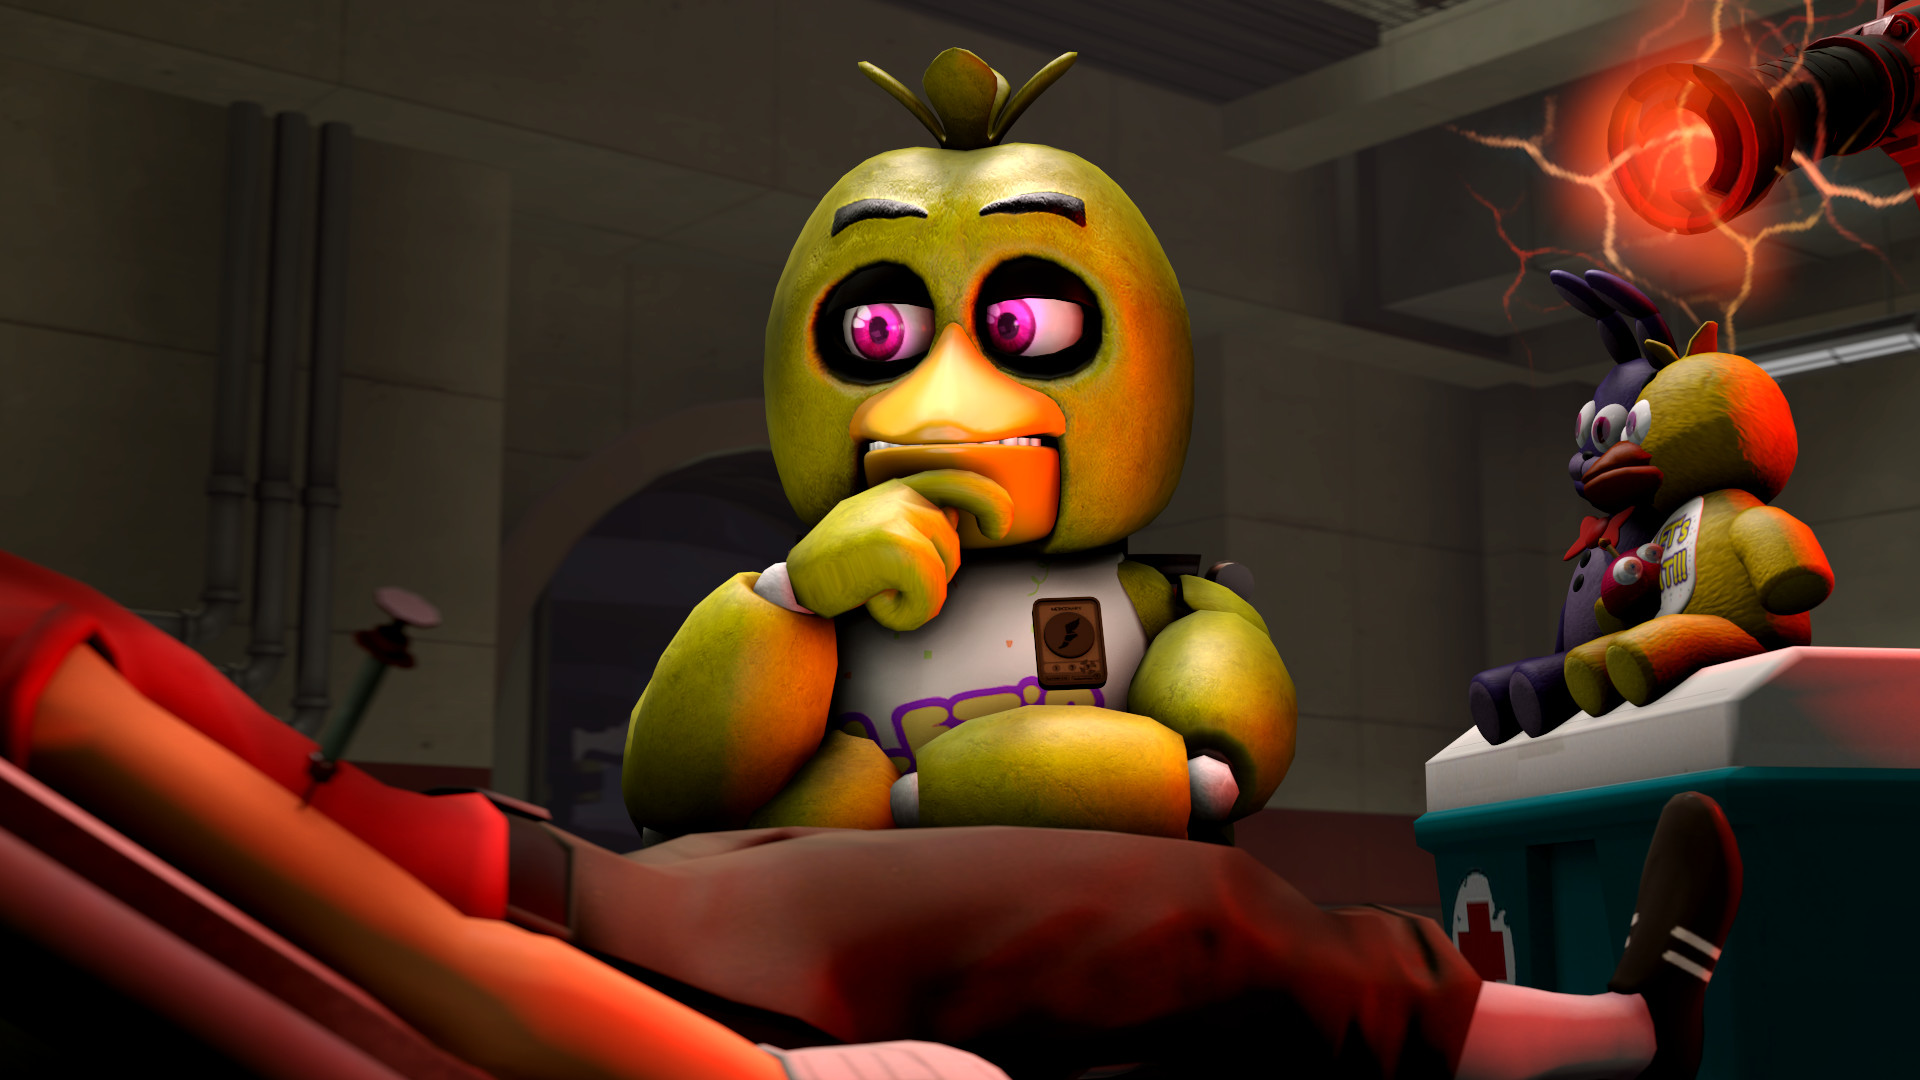 1920x1080 ... Chica-TF2 and FNAF Crossover by TalonDang